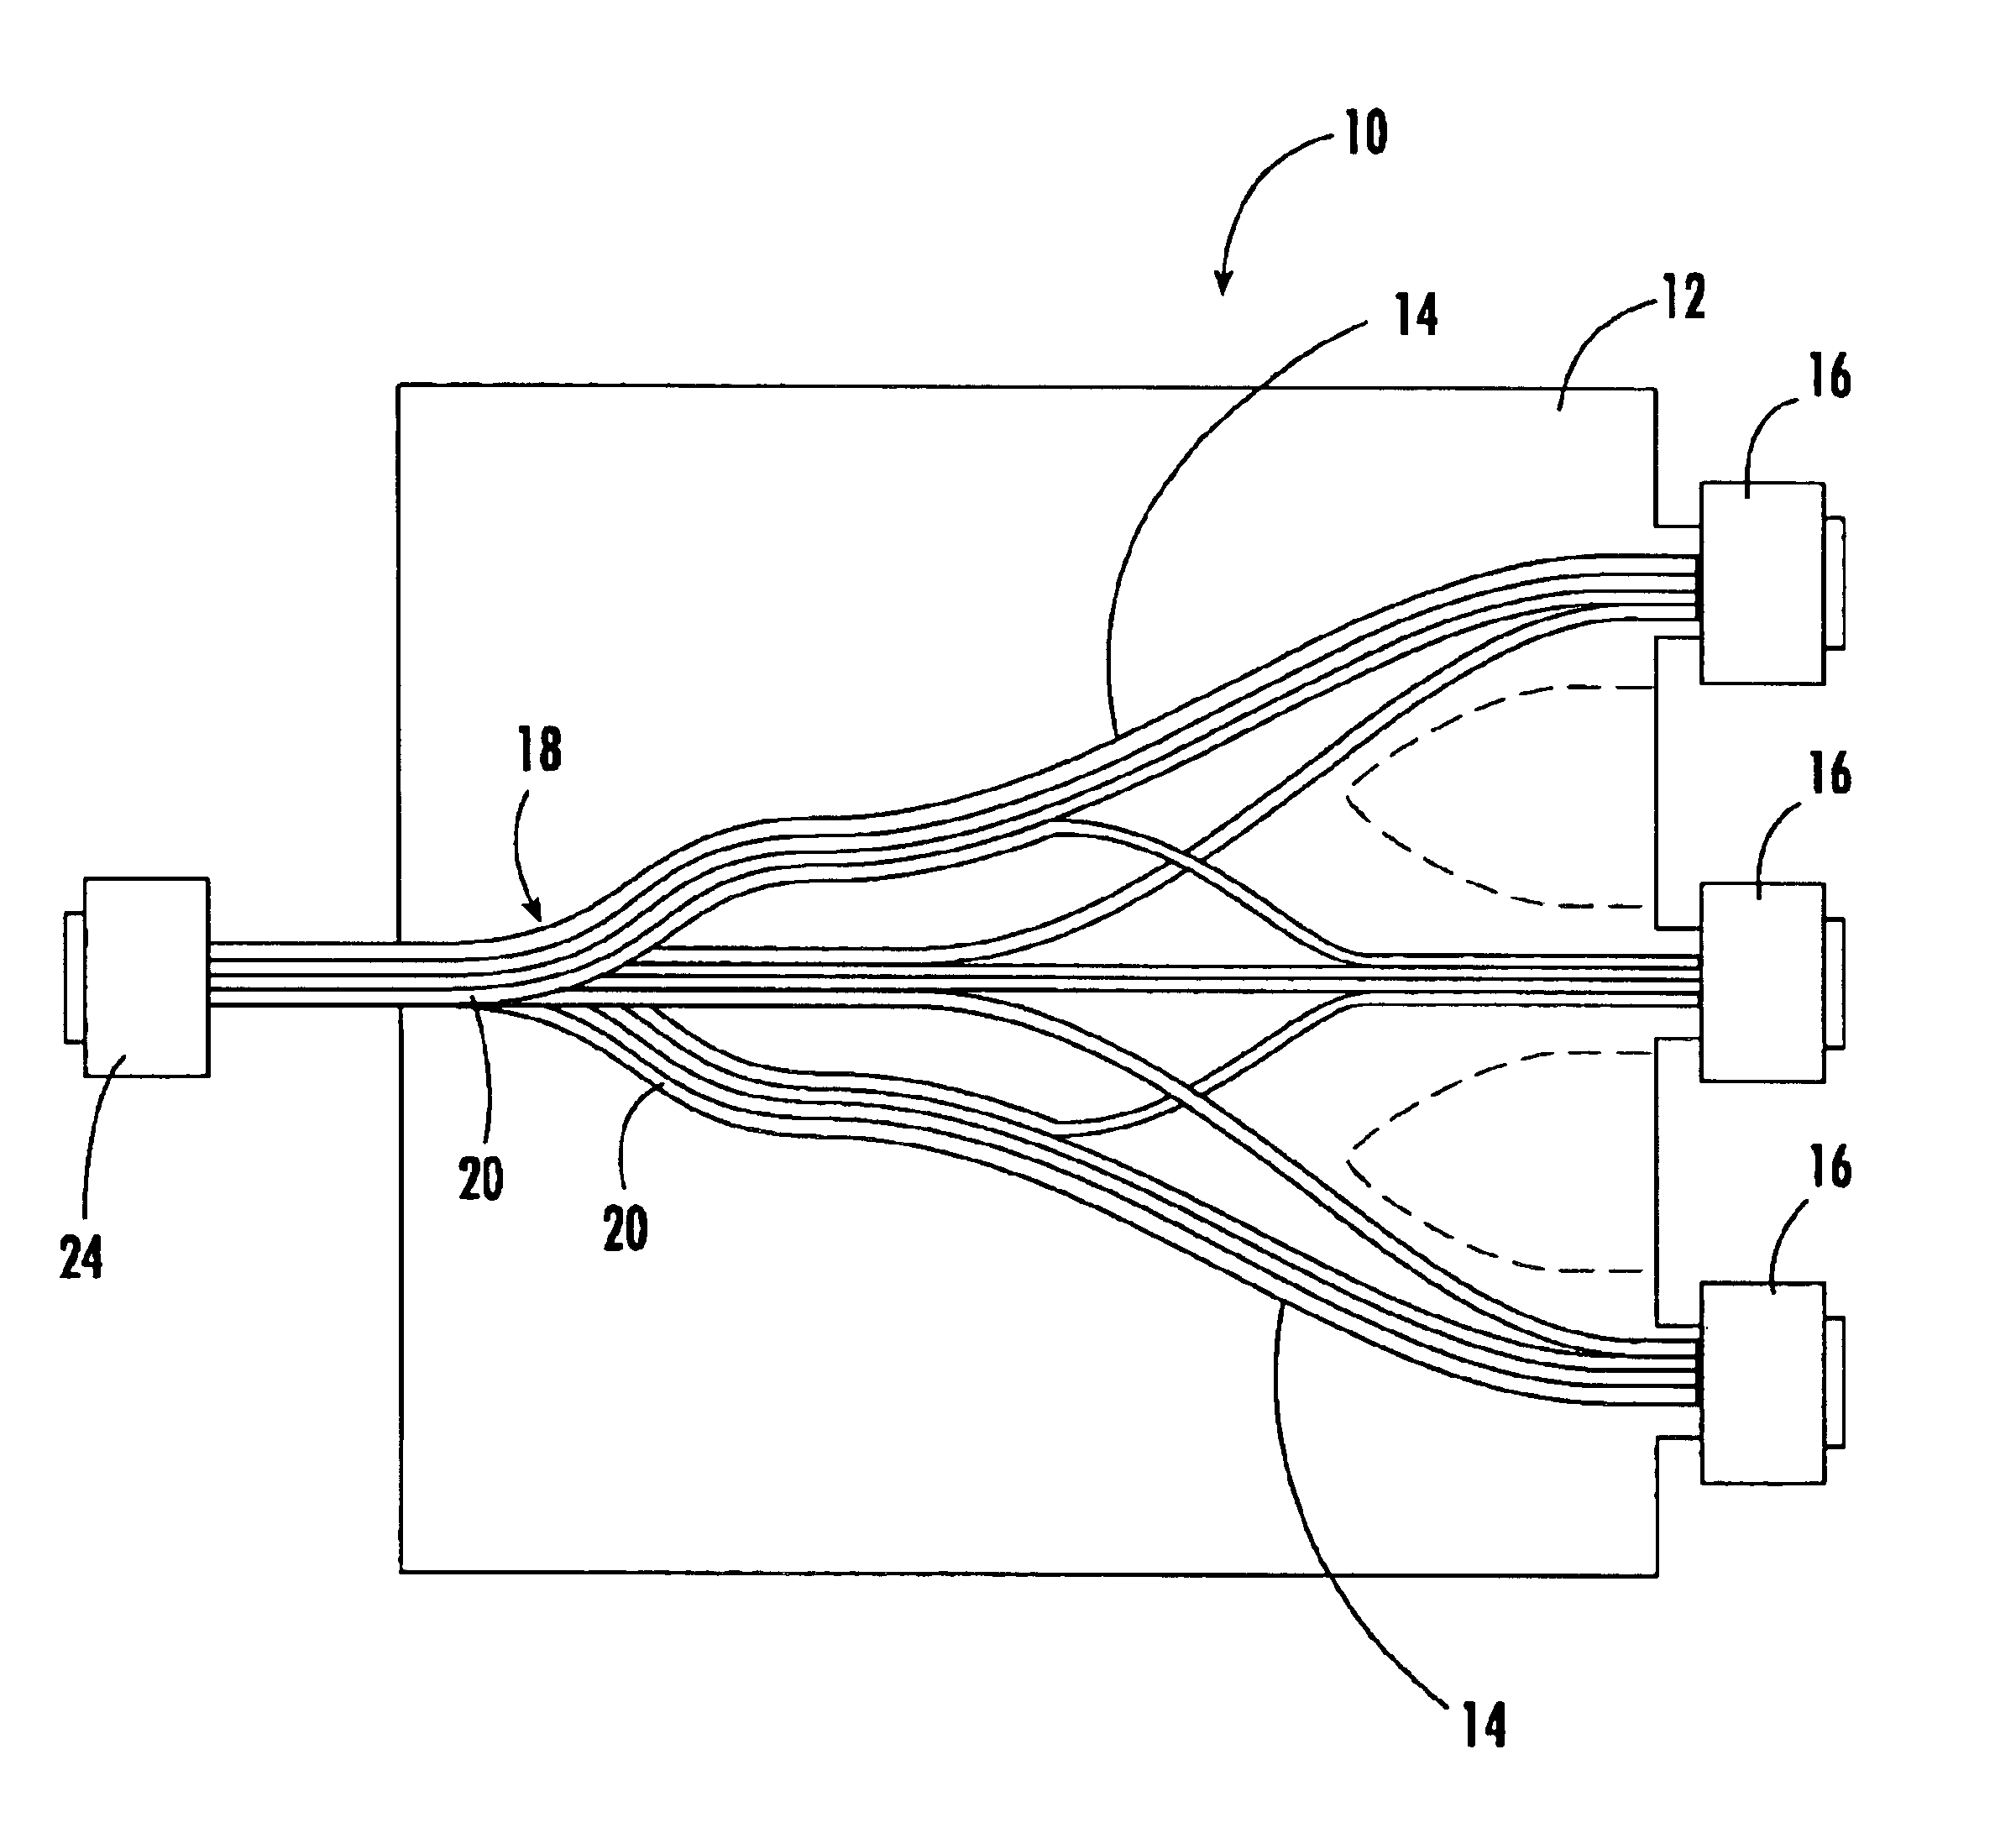 Optical circuit having legs in a stacked configuration and an associated fabrication method